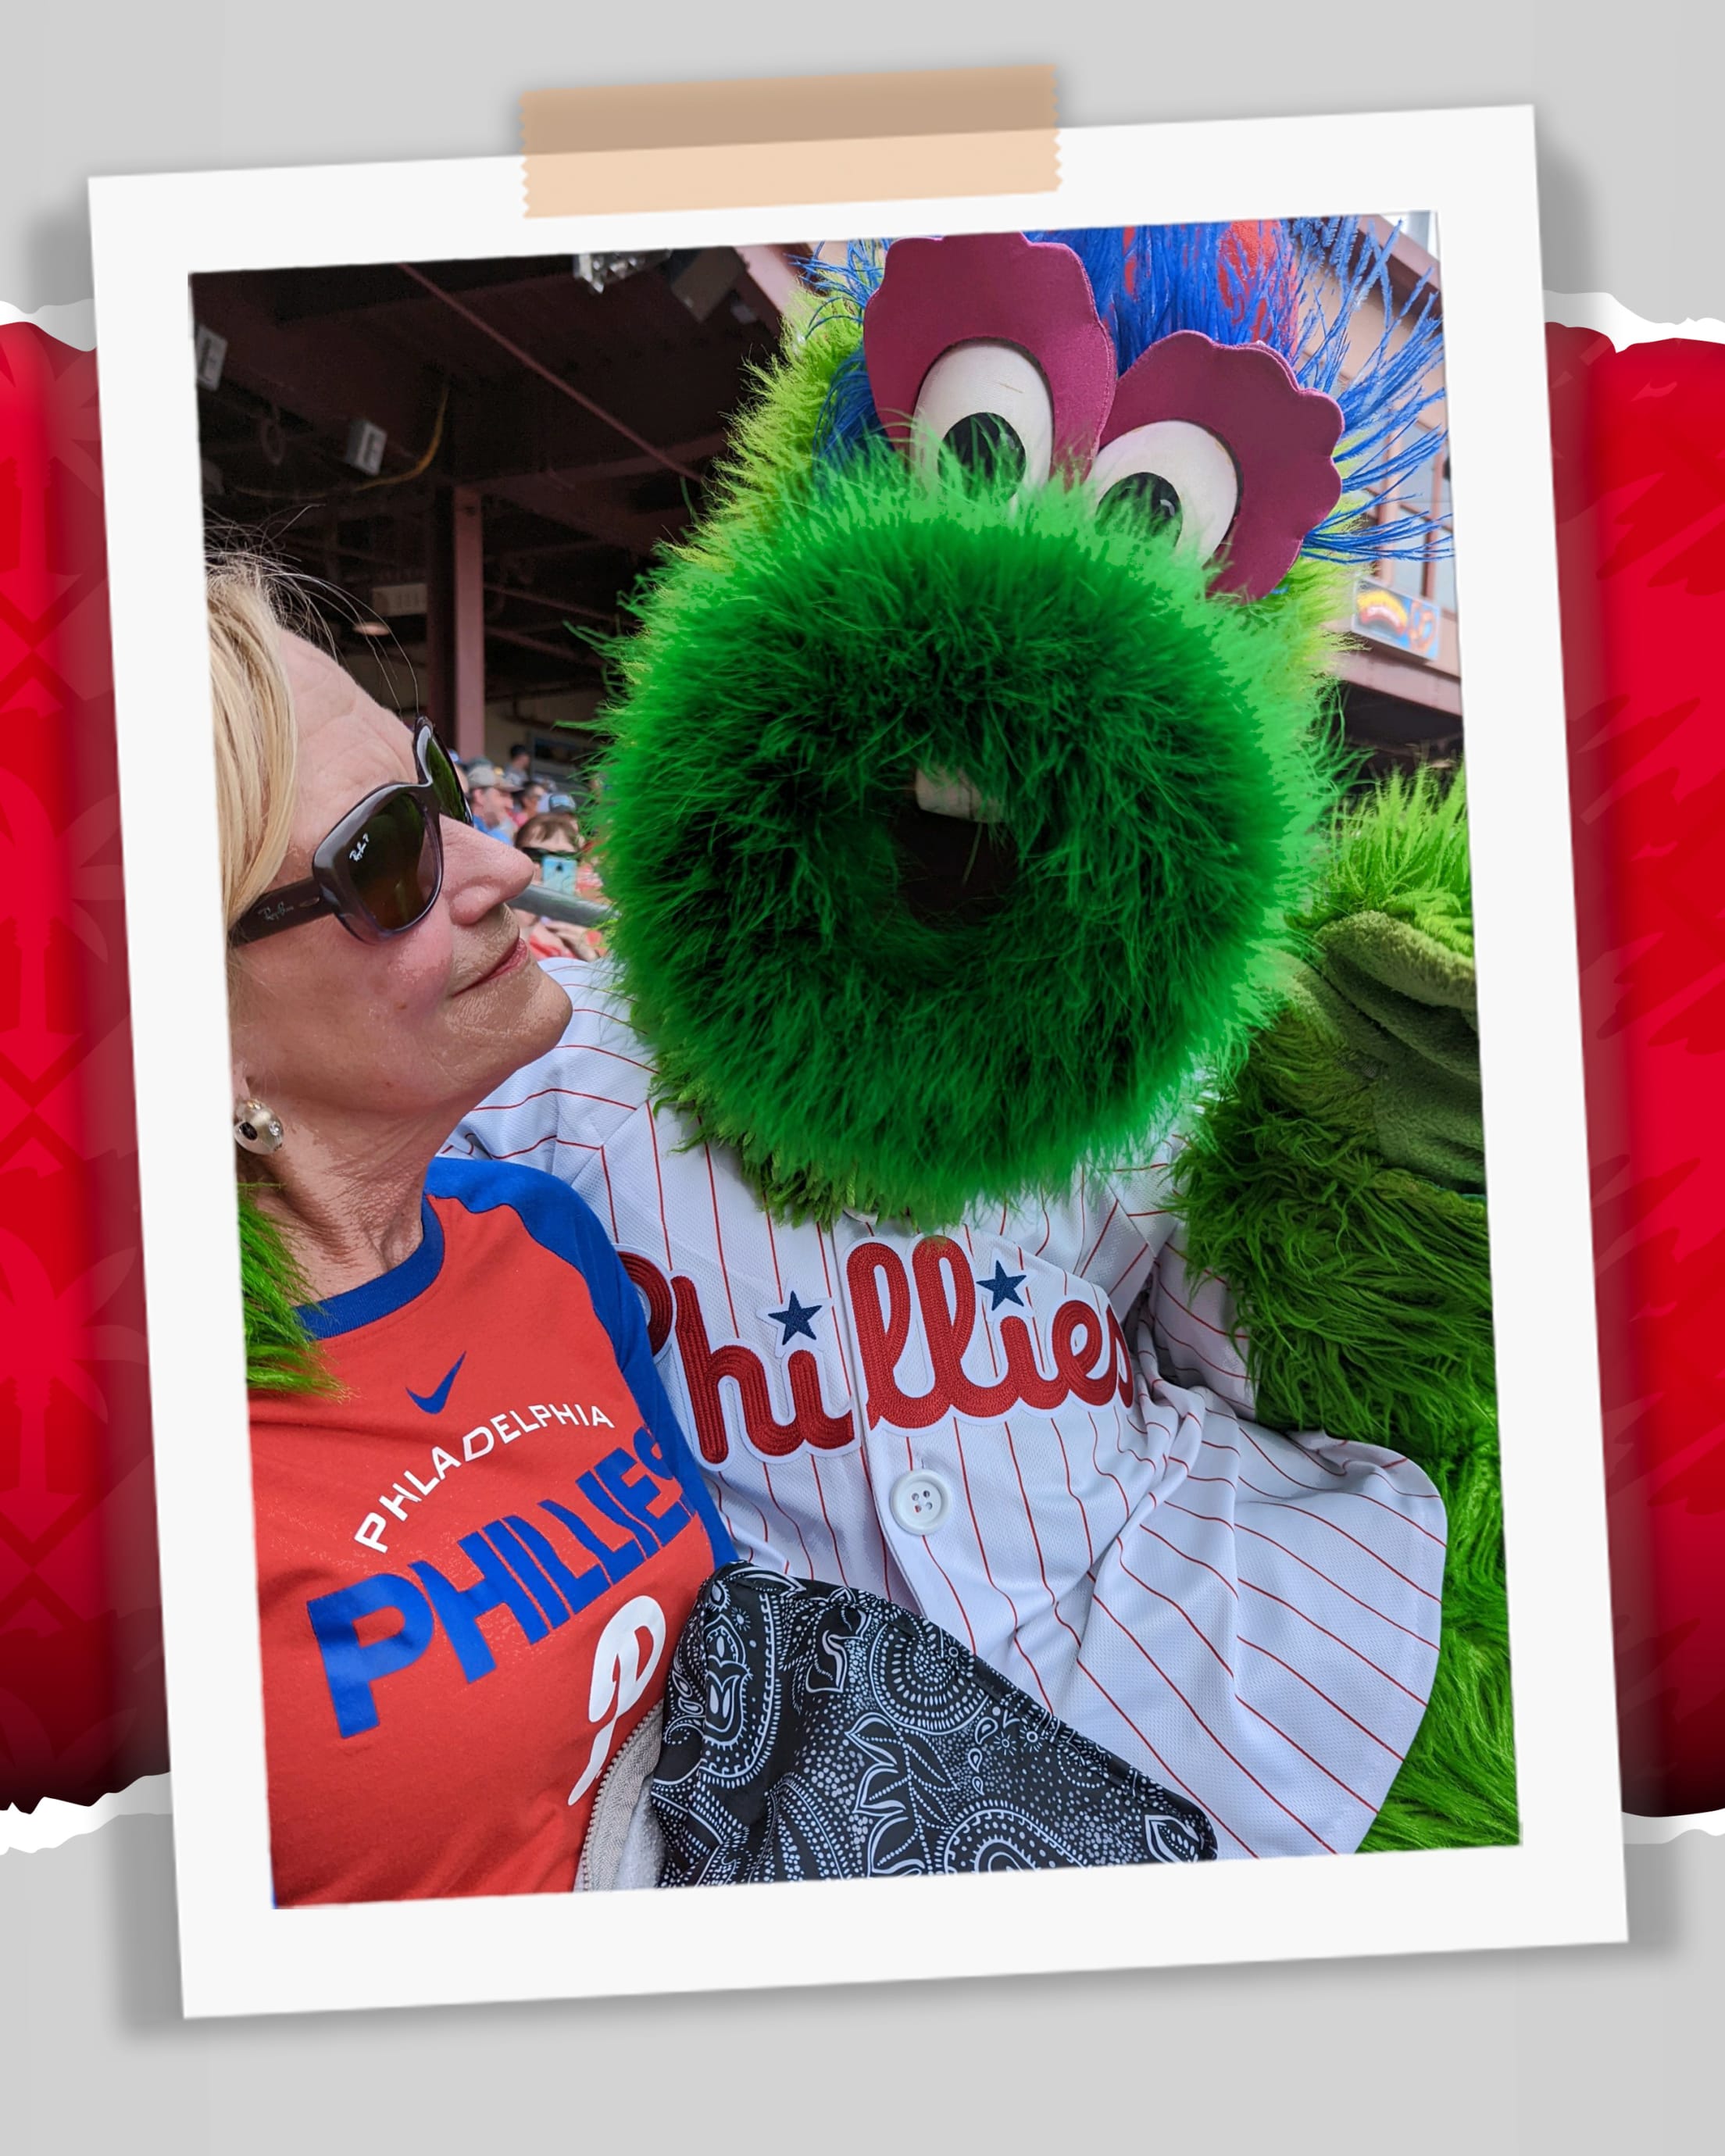 Dopey's Travels: Clearwater, Fla. - Phillies Spring Training